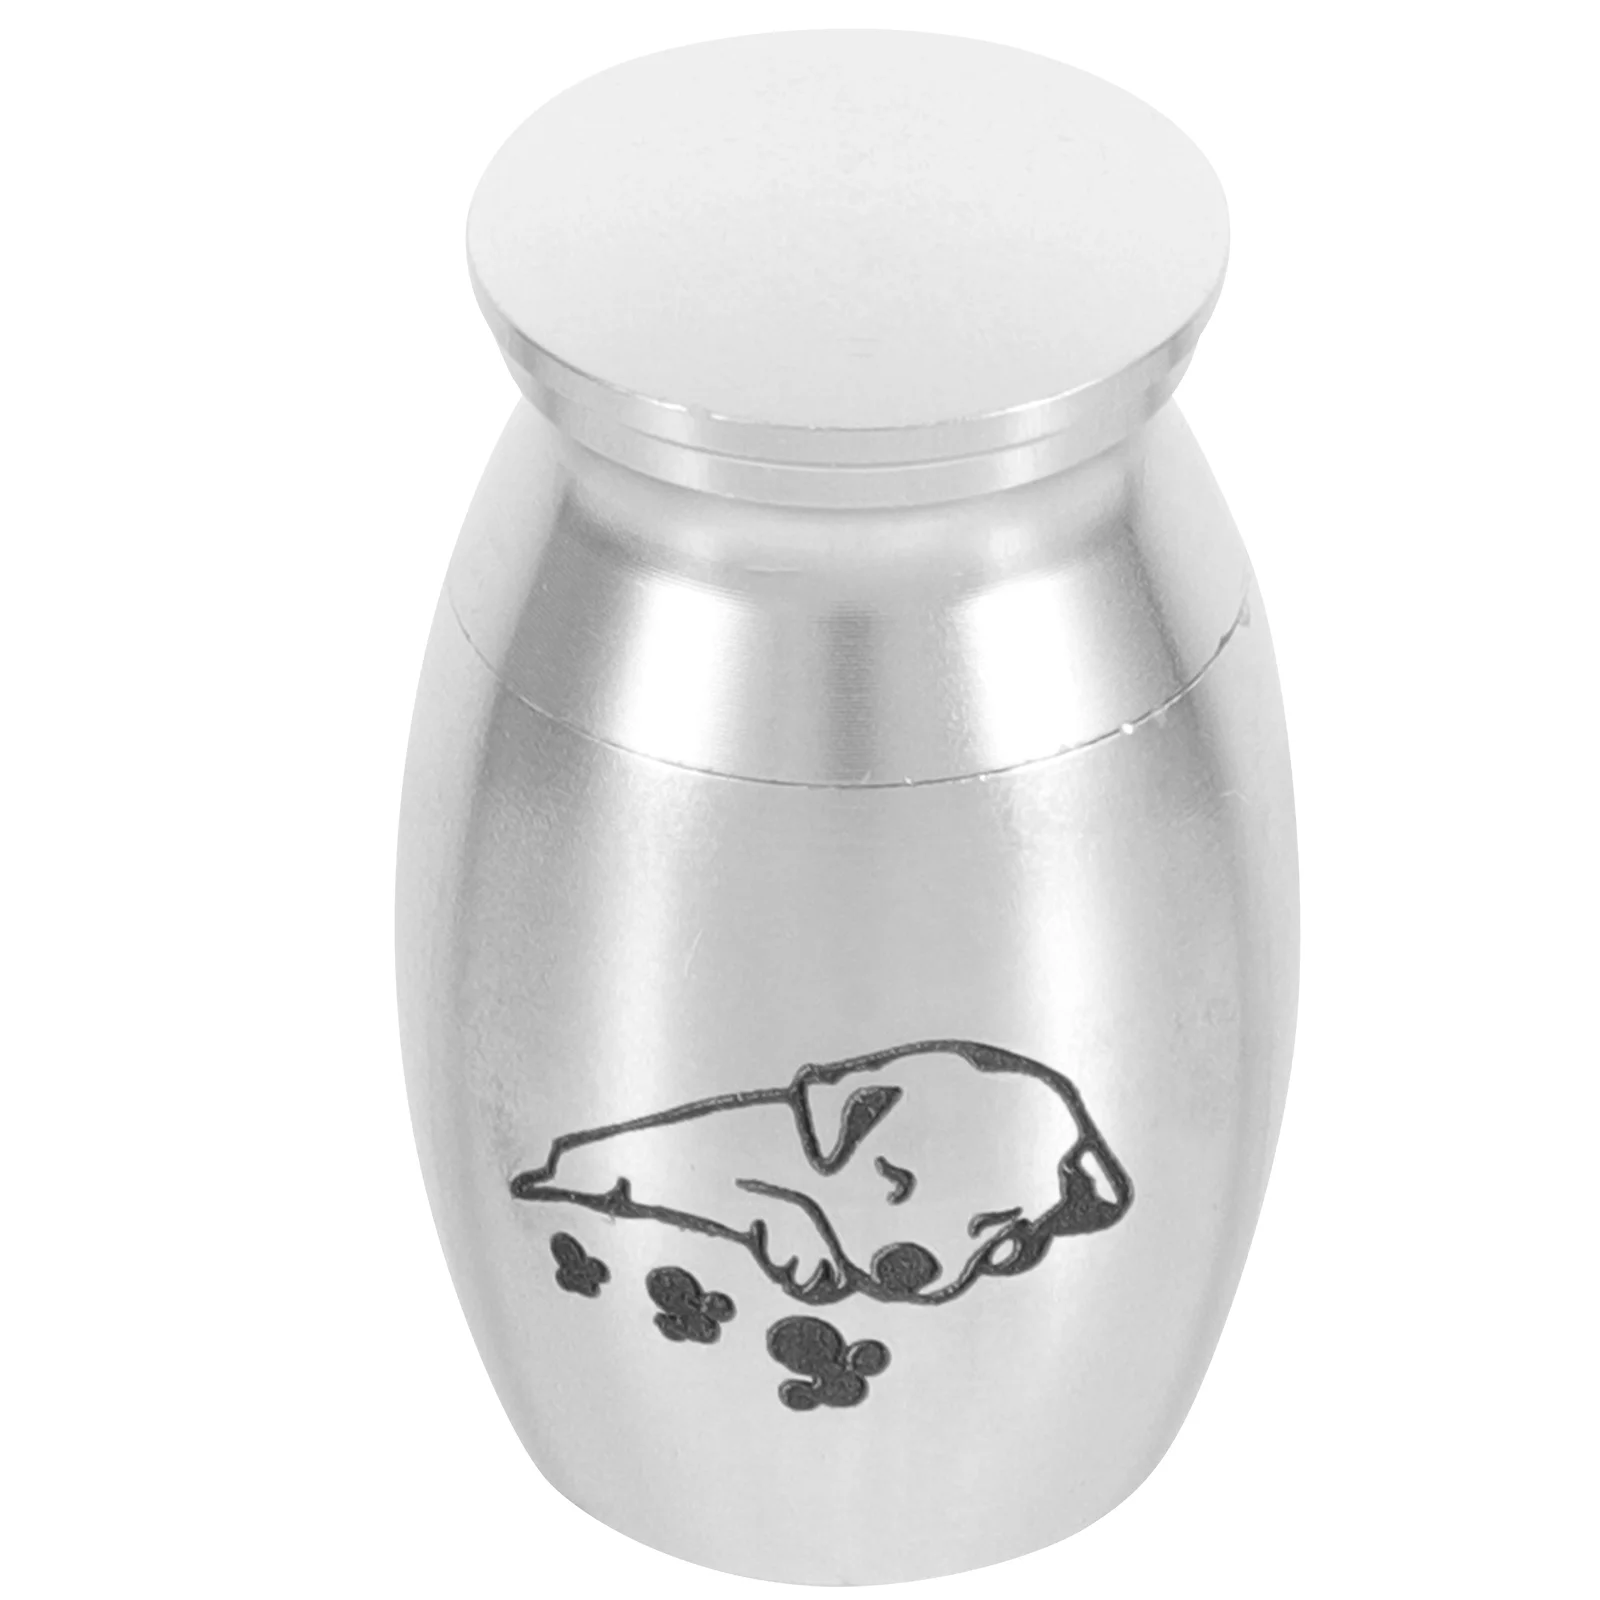 

Pet Urn Decorative Urns Metal For Cats Keepsake Small Ashes Cremation Burial Dog Dogs